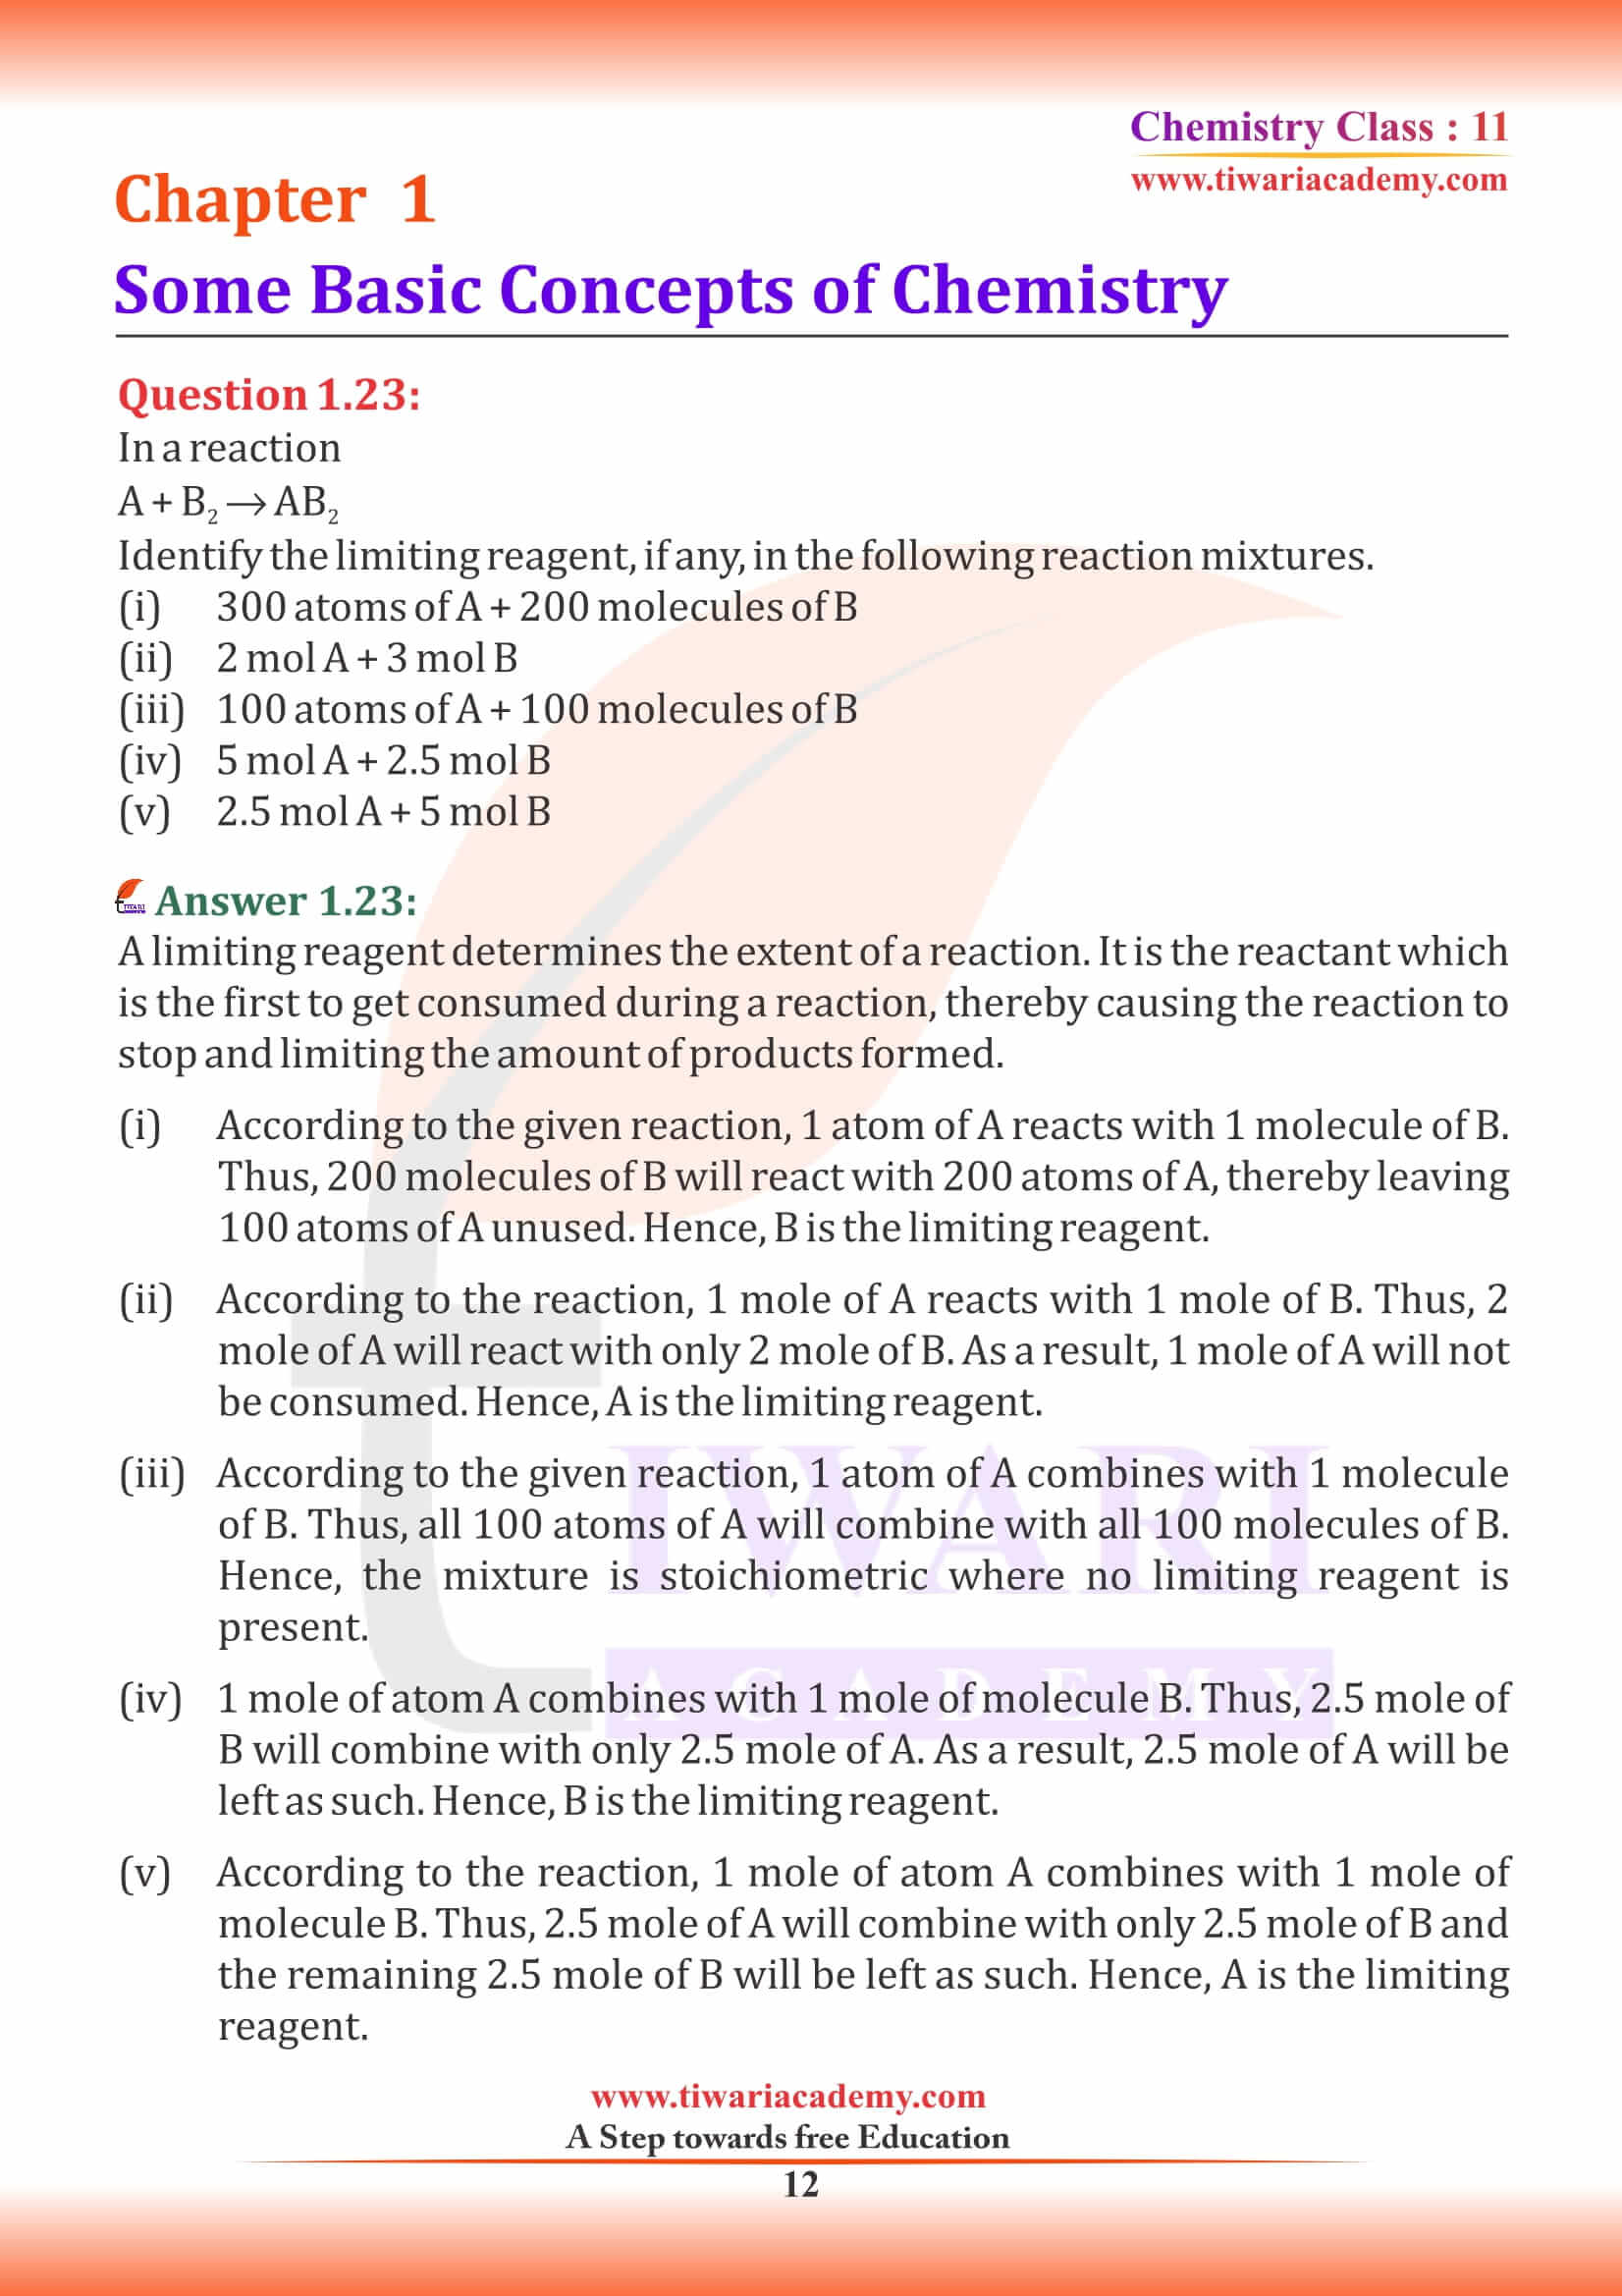 Class 11 Chemistry Chapter 1 answers